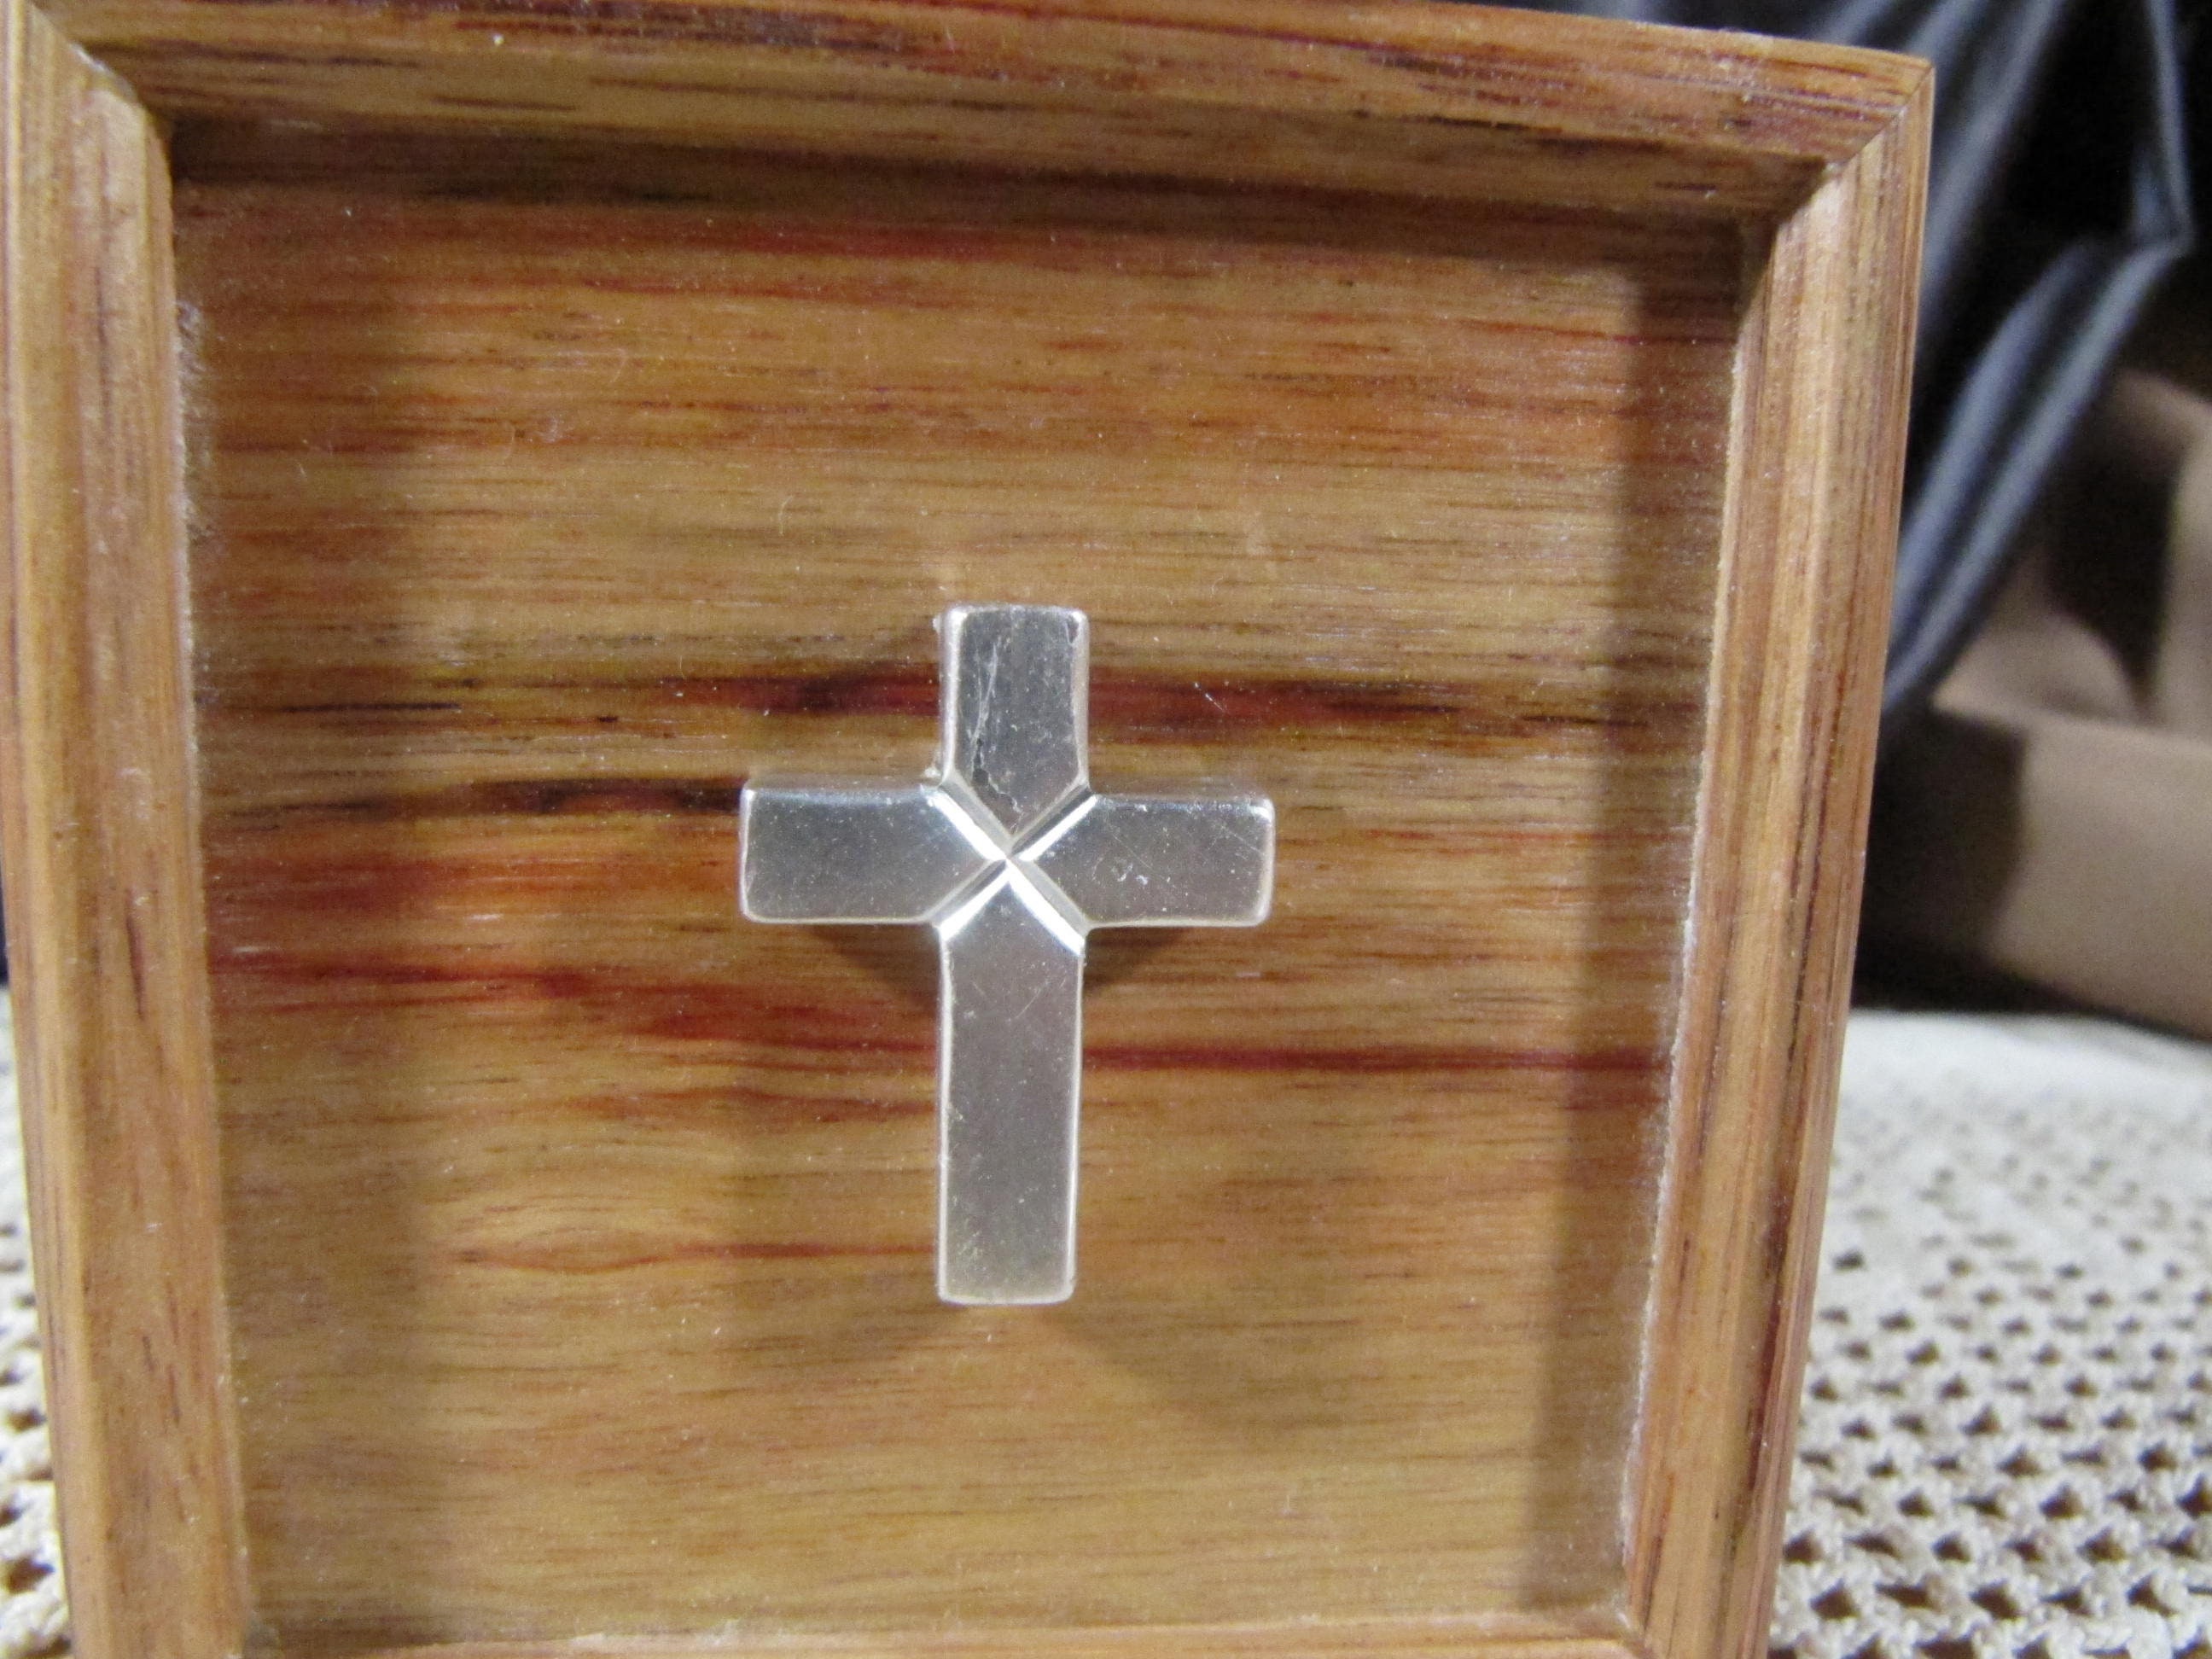 Handcrafted Wood Trinket Jewelry Box Hinged Lid Signed Flowers Cross-stitch